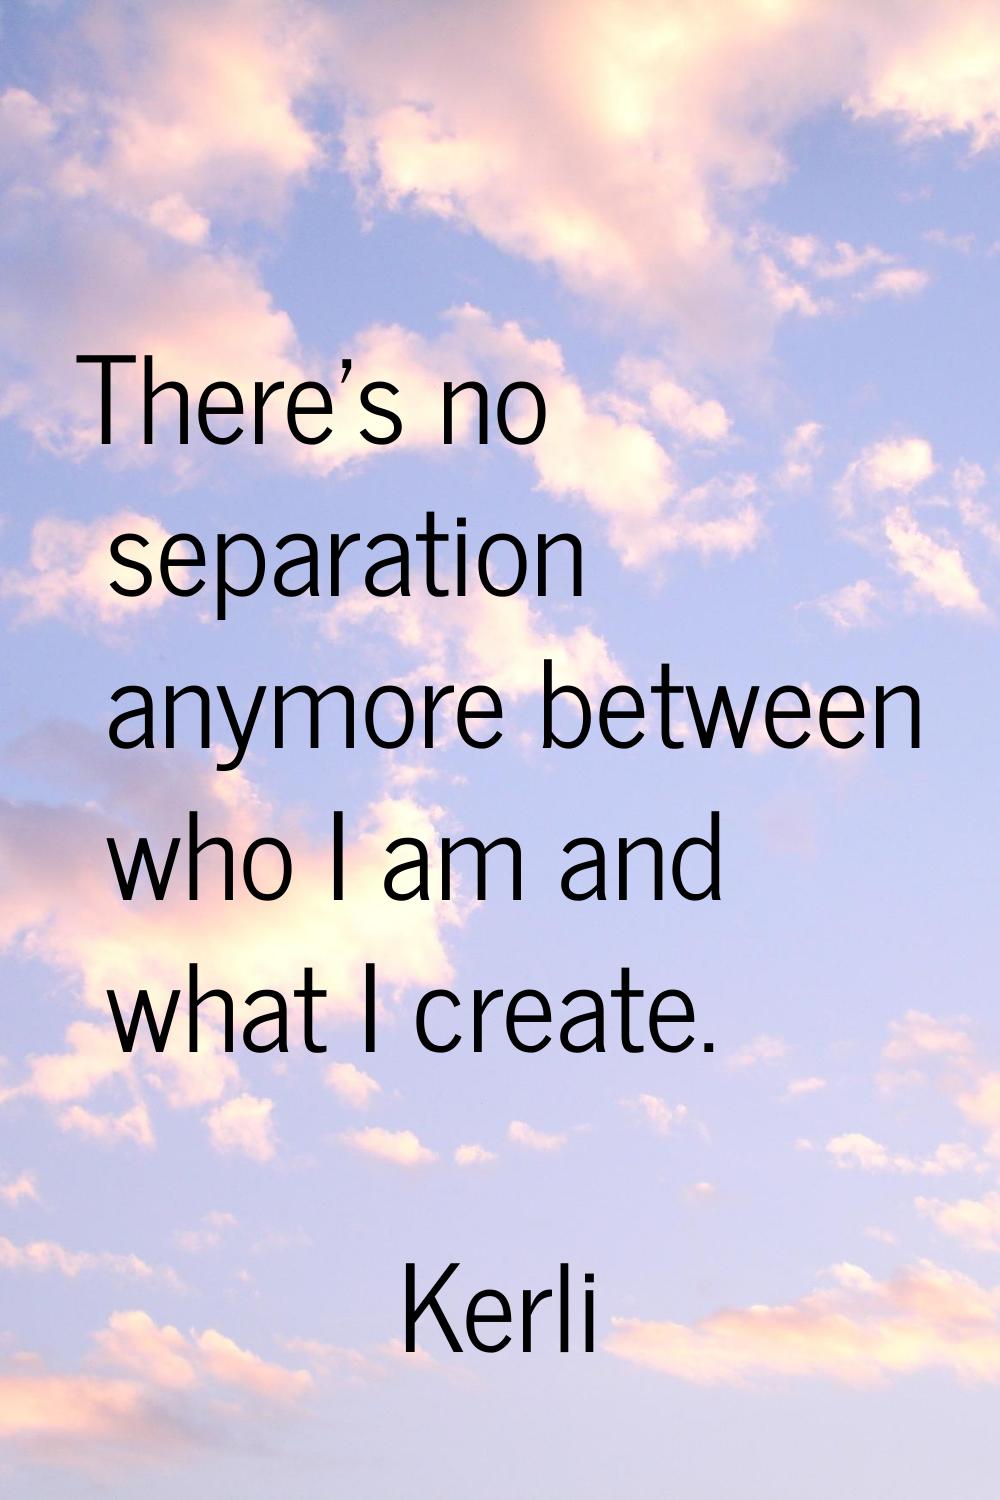 There's no separation anymore between who I am and what I create.